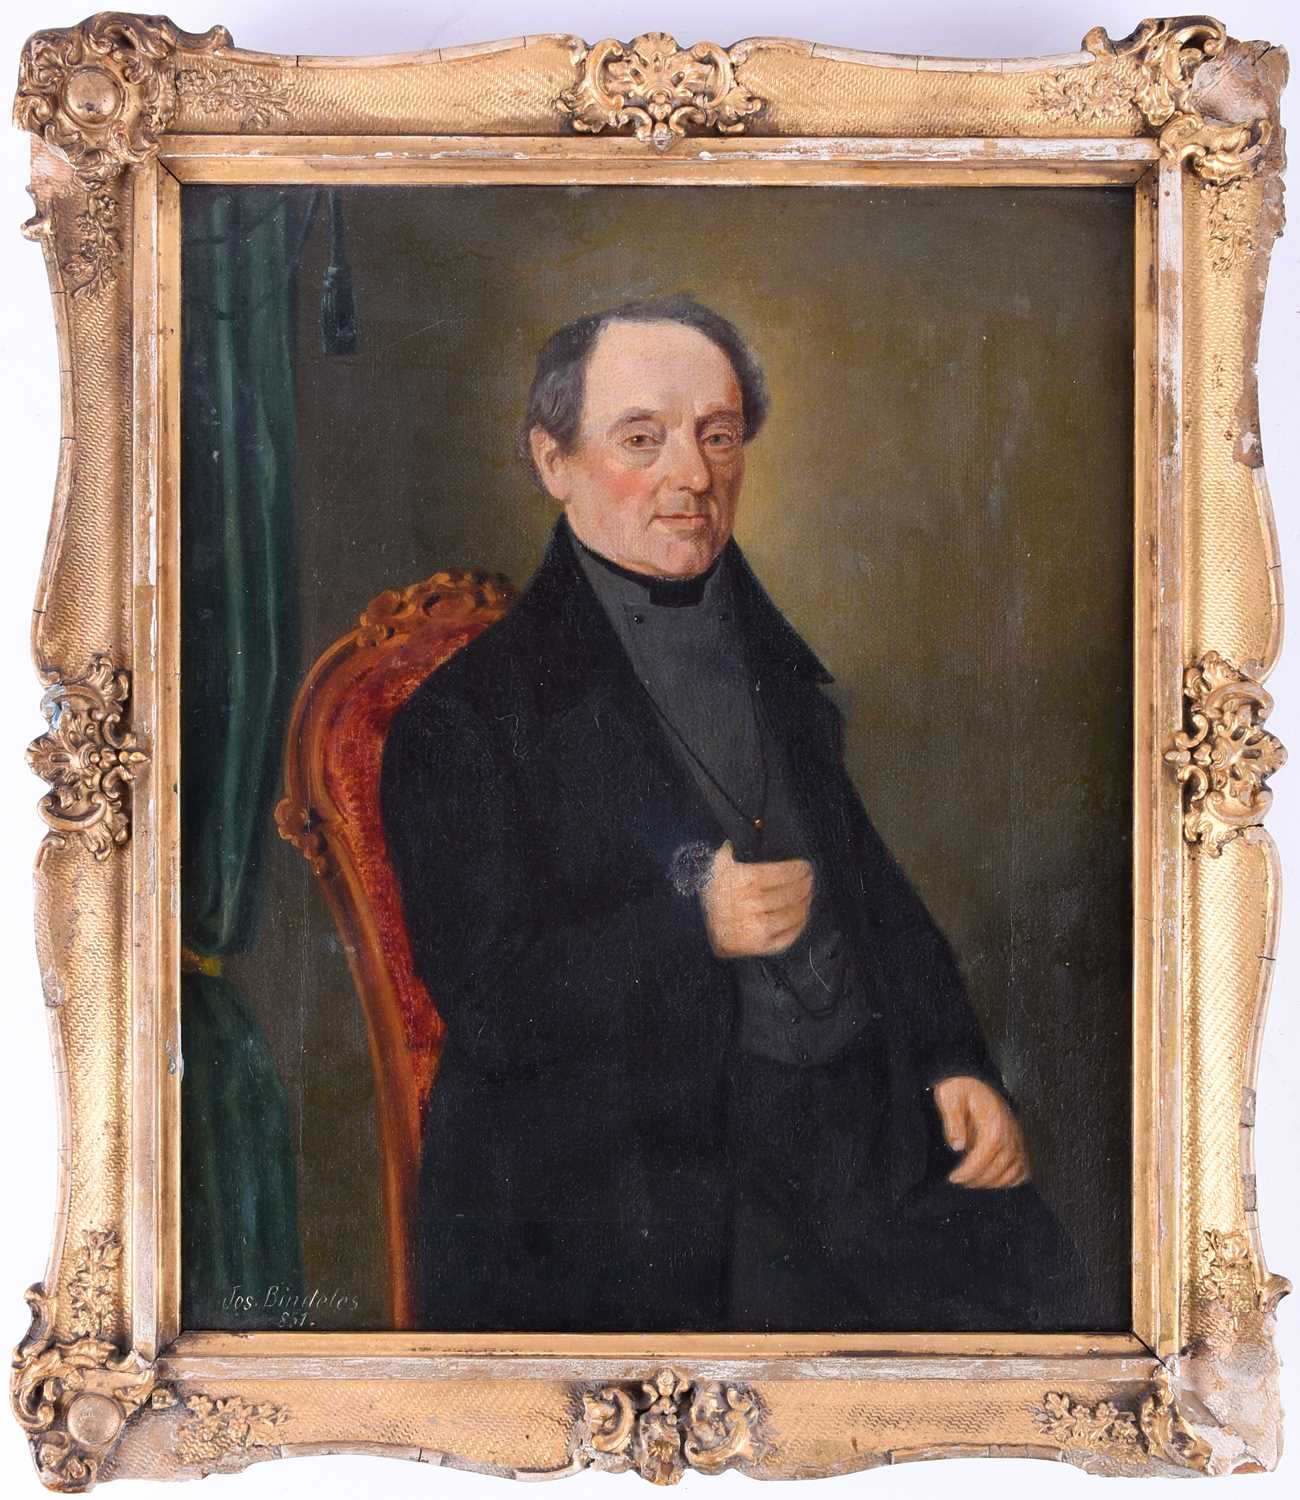 Joseph Bindeles, a portrait of a seated gentleman, dated 1851, oil on canvas, 27 cm x 22 cm in a